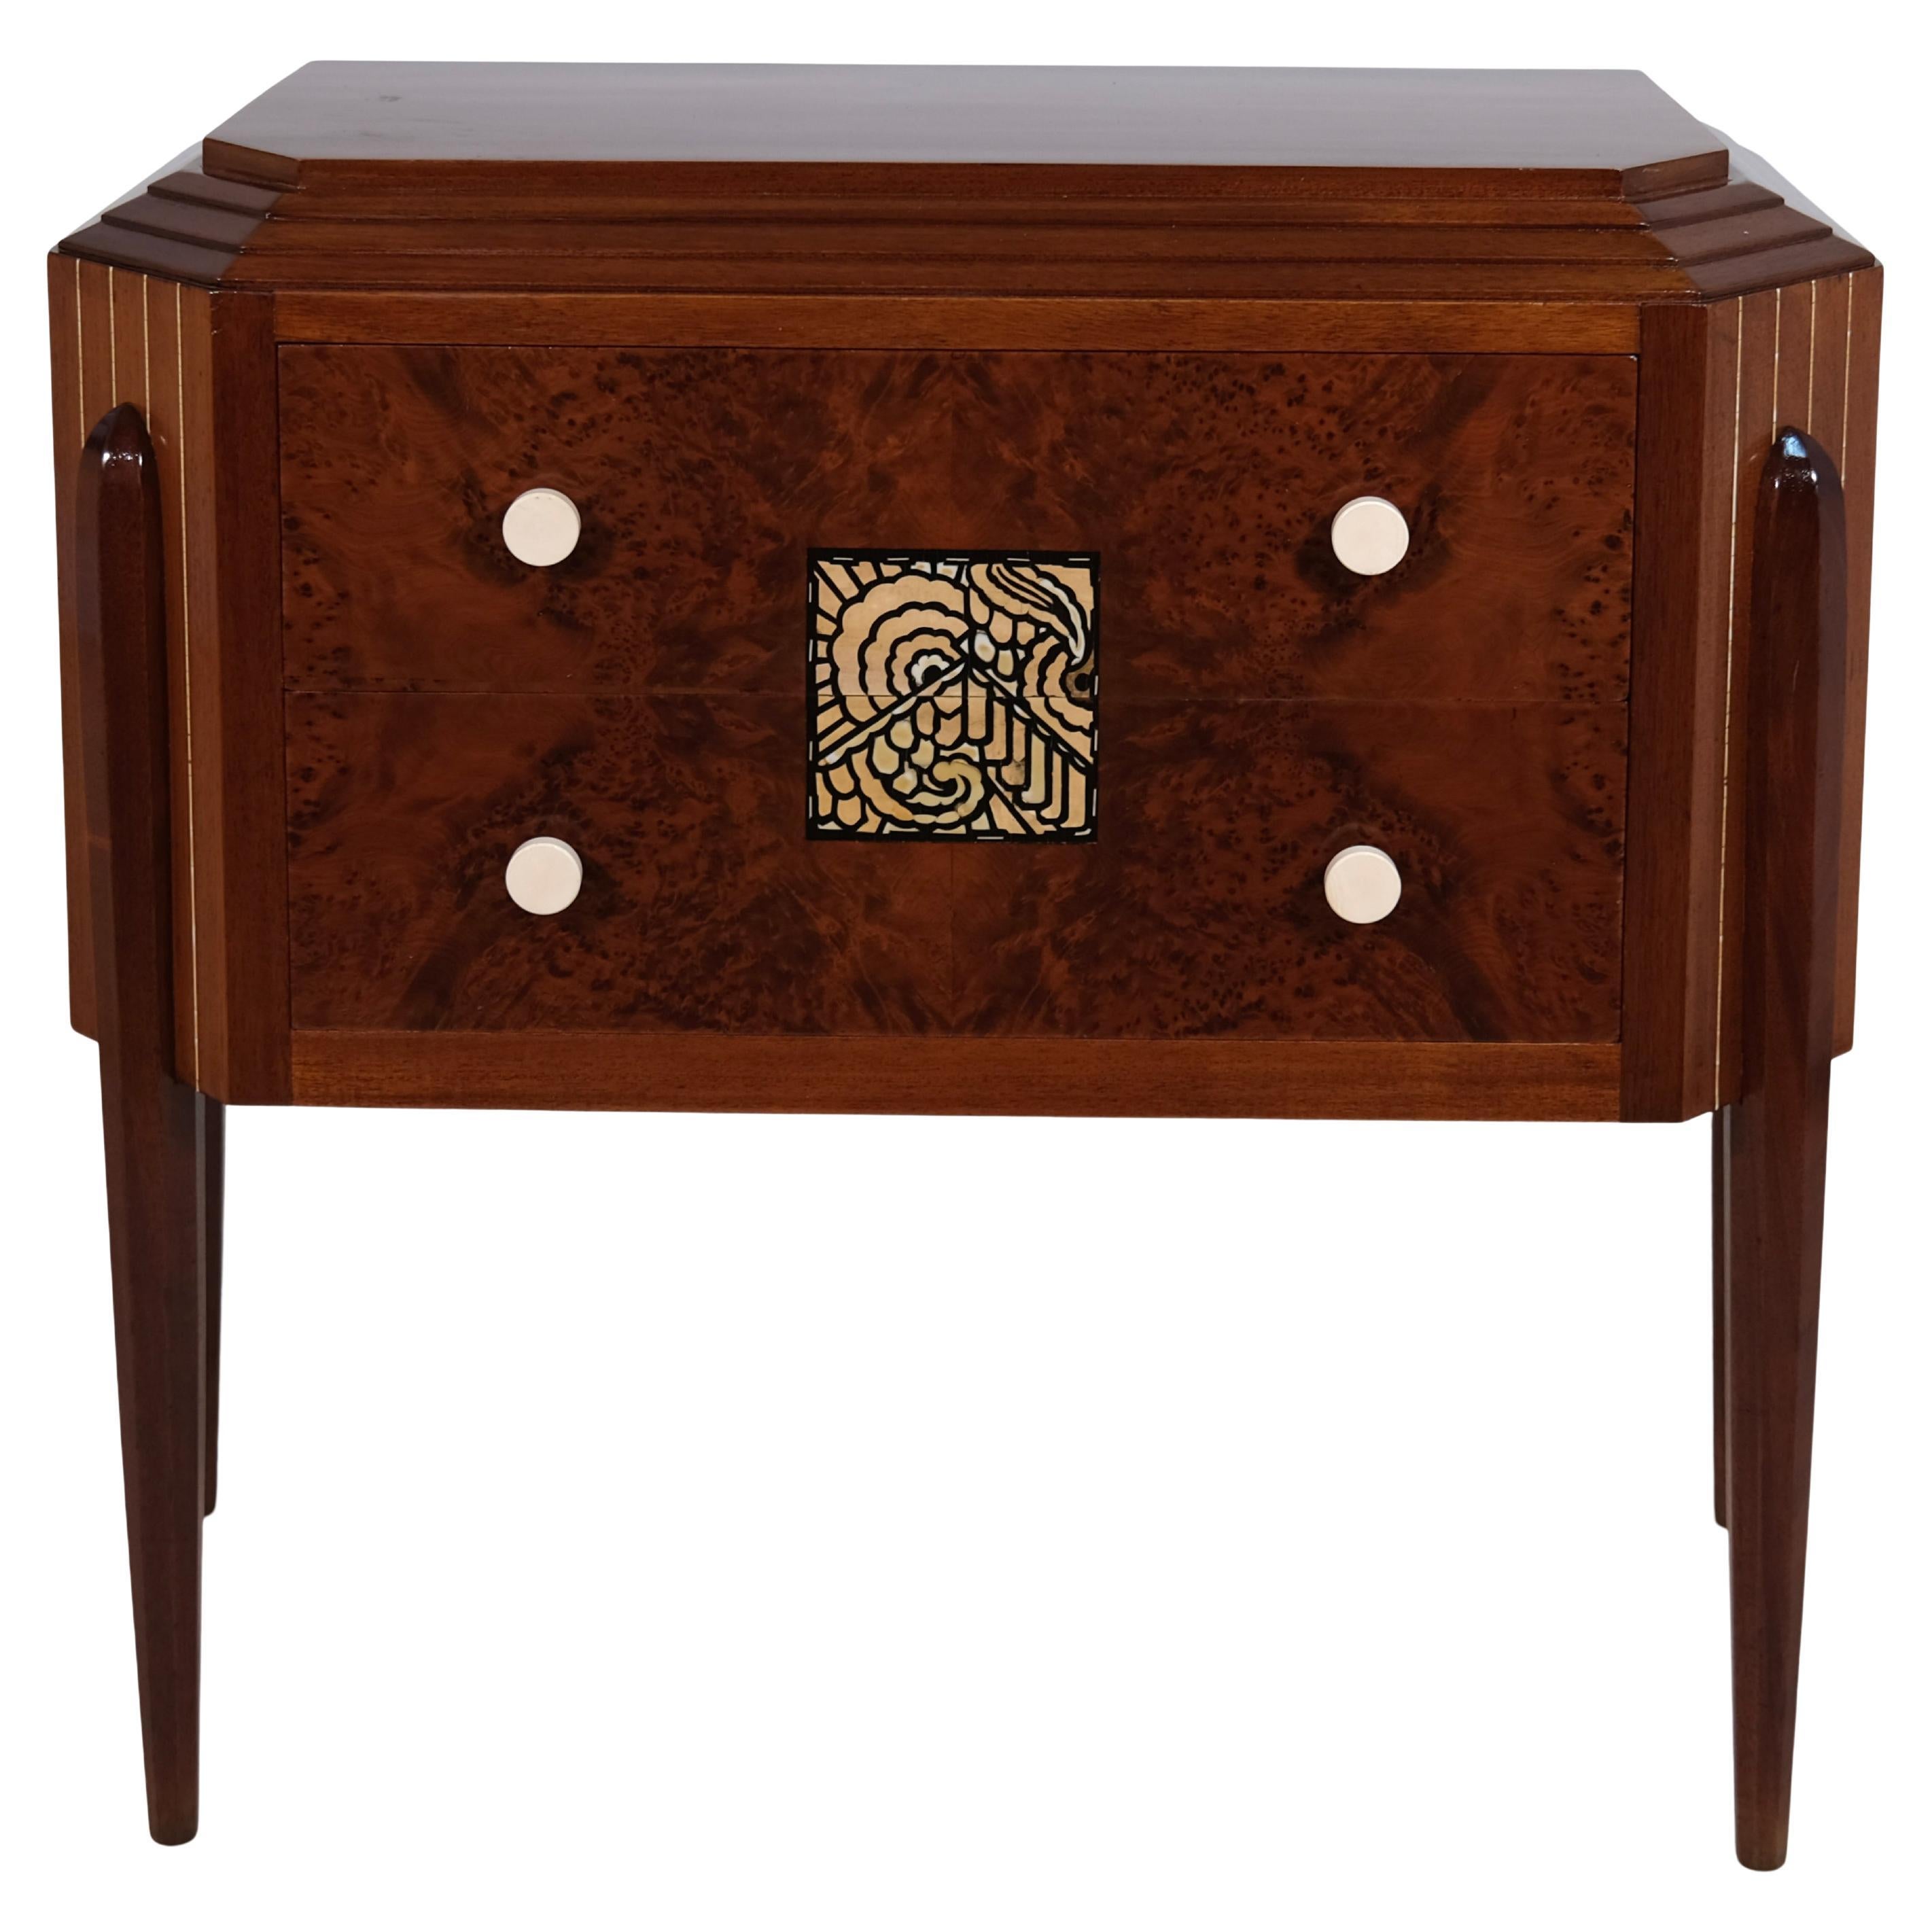 French Art Deco Chest Of Drawers in Mahogany and Thuja with Floral Inlays For Sale